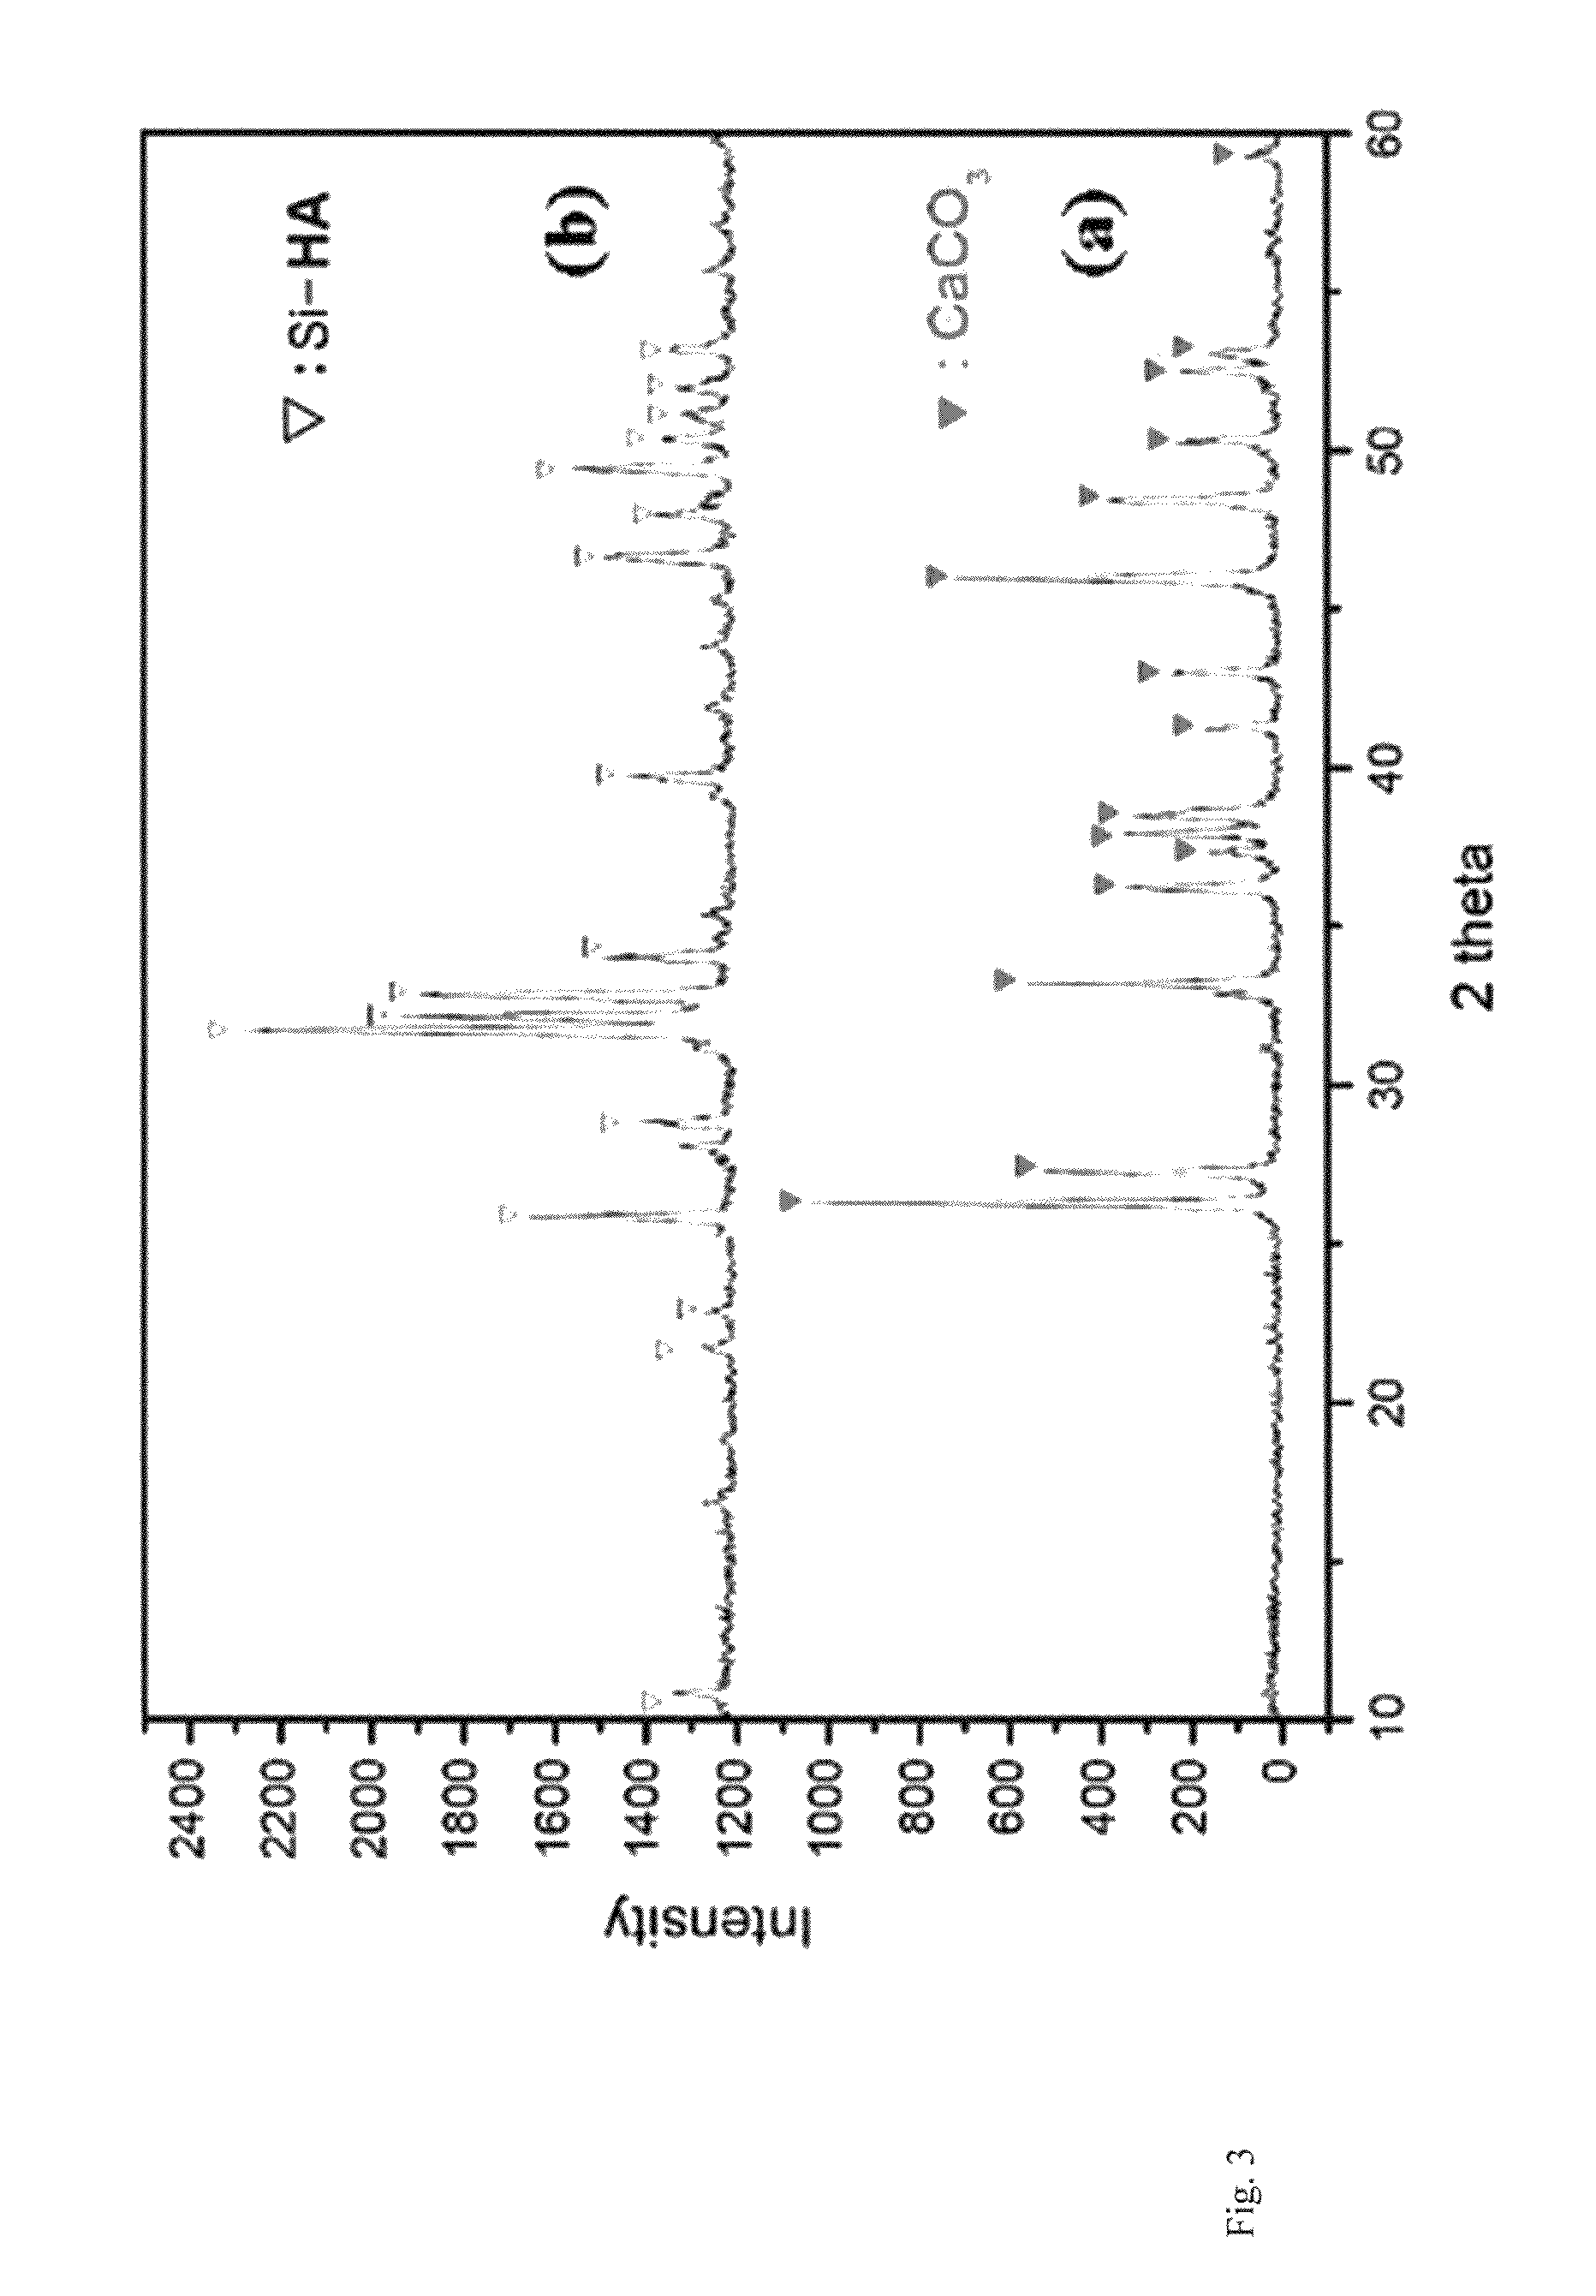 Porous composite comprising silicon-substituted hydroxyapatite and ß- tricalcium phosphate, and process for preparing the same